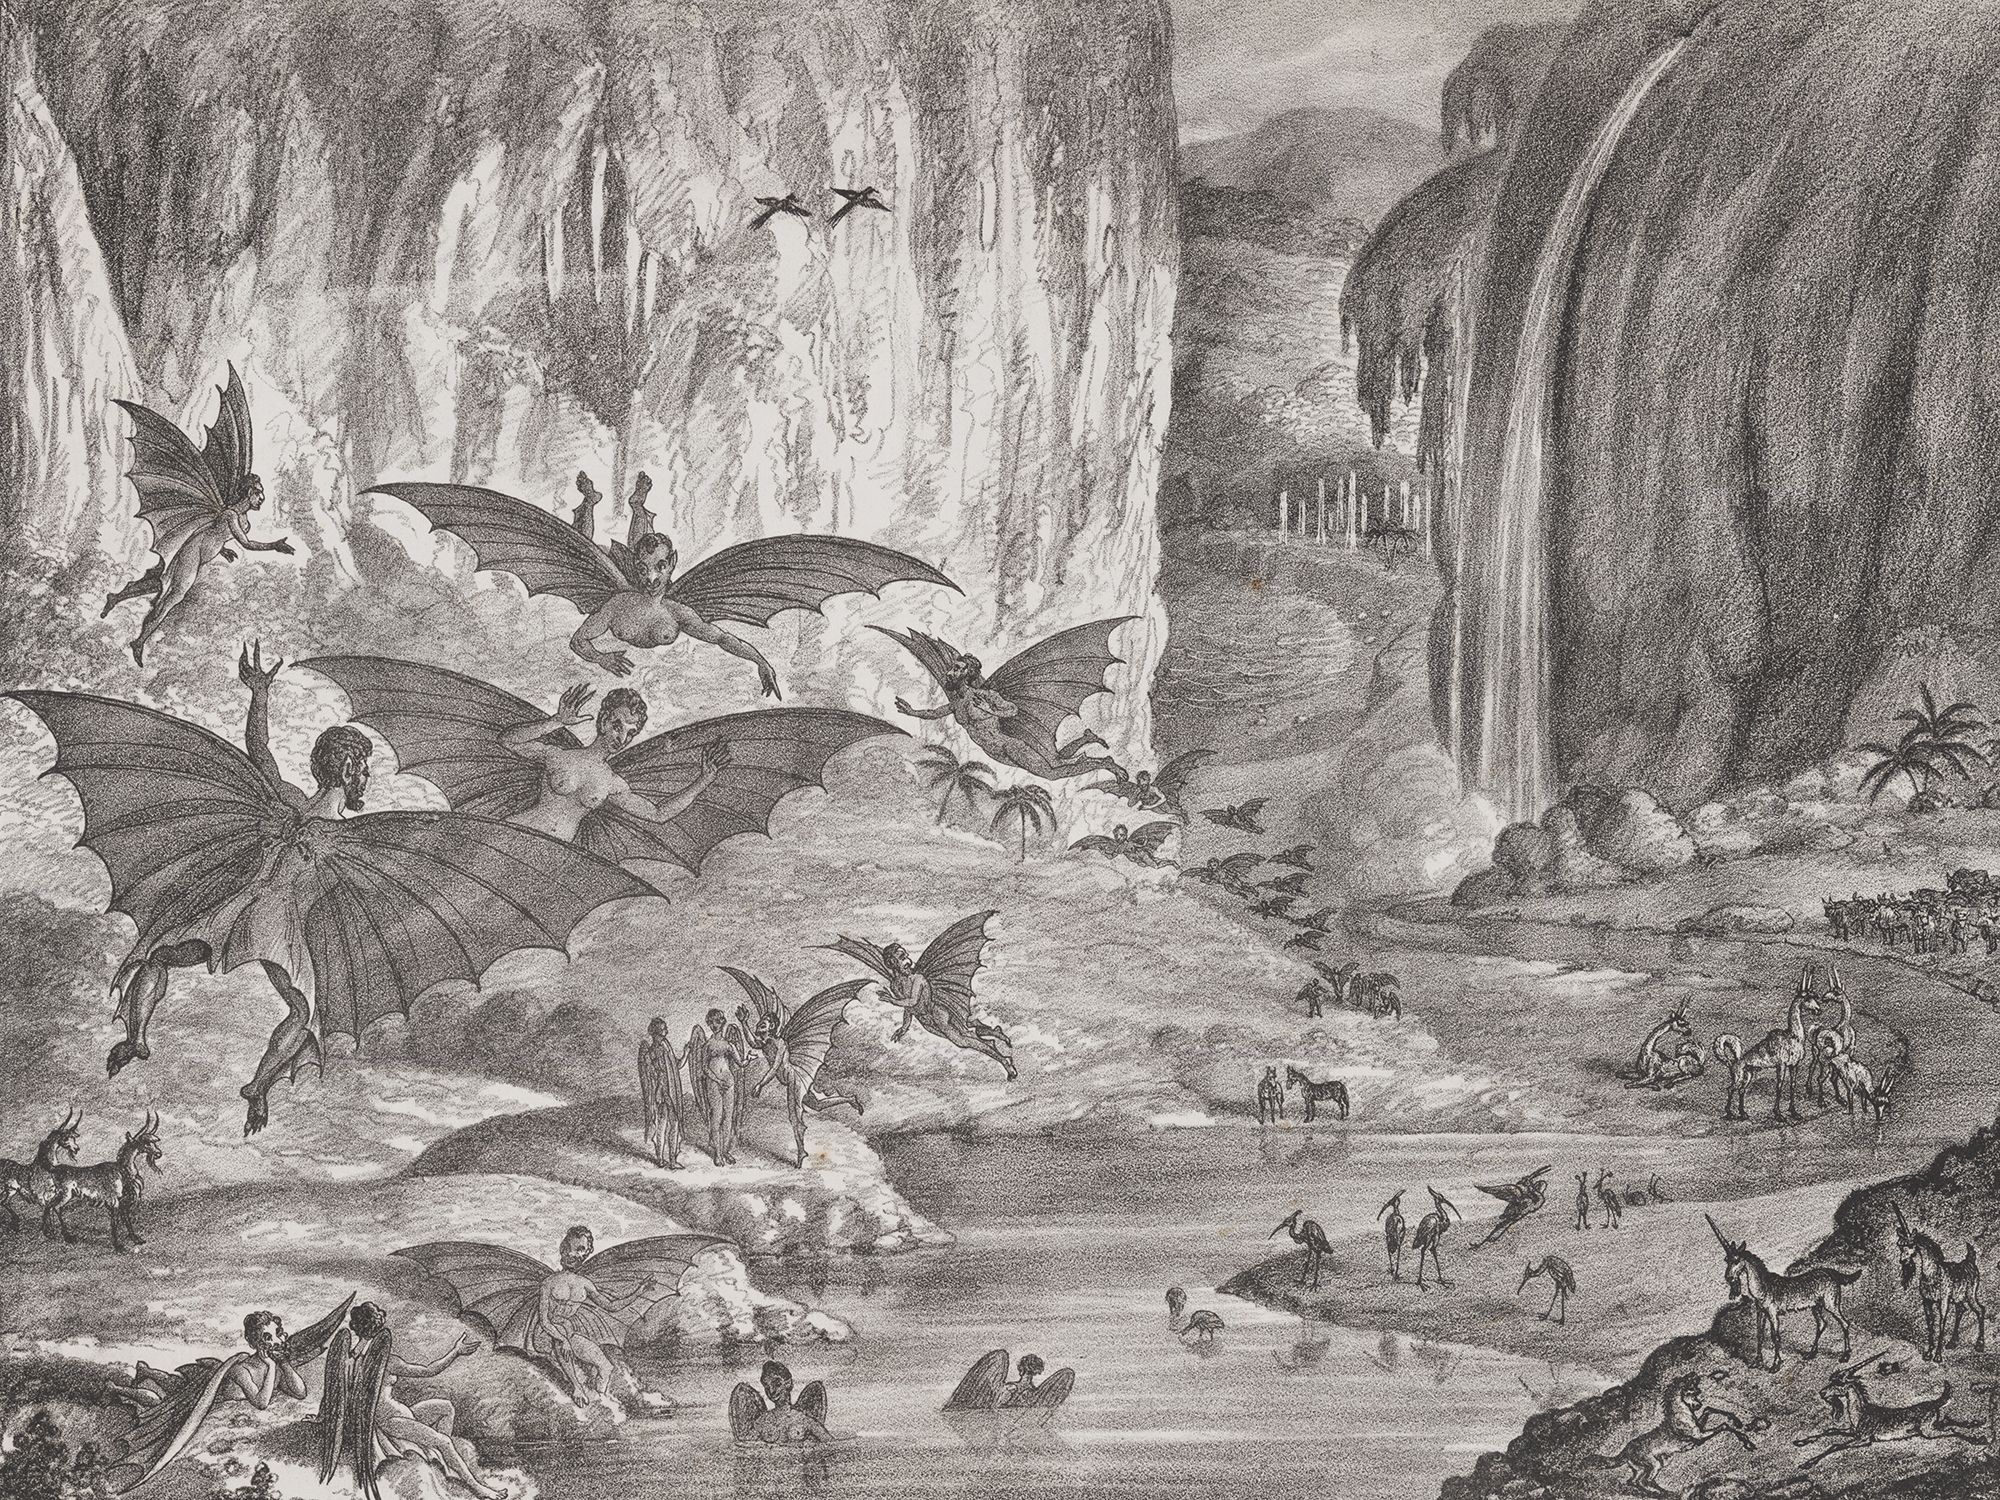 An archival engraving depicts bat-winged humanoids frolicking above a fantastic landscape.